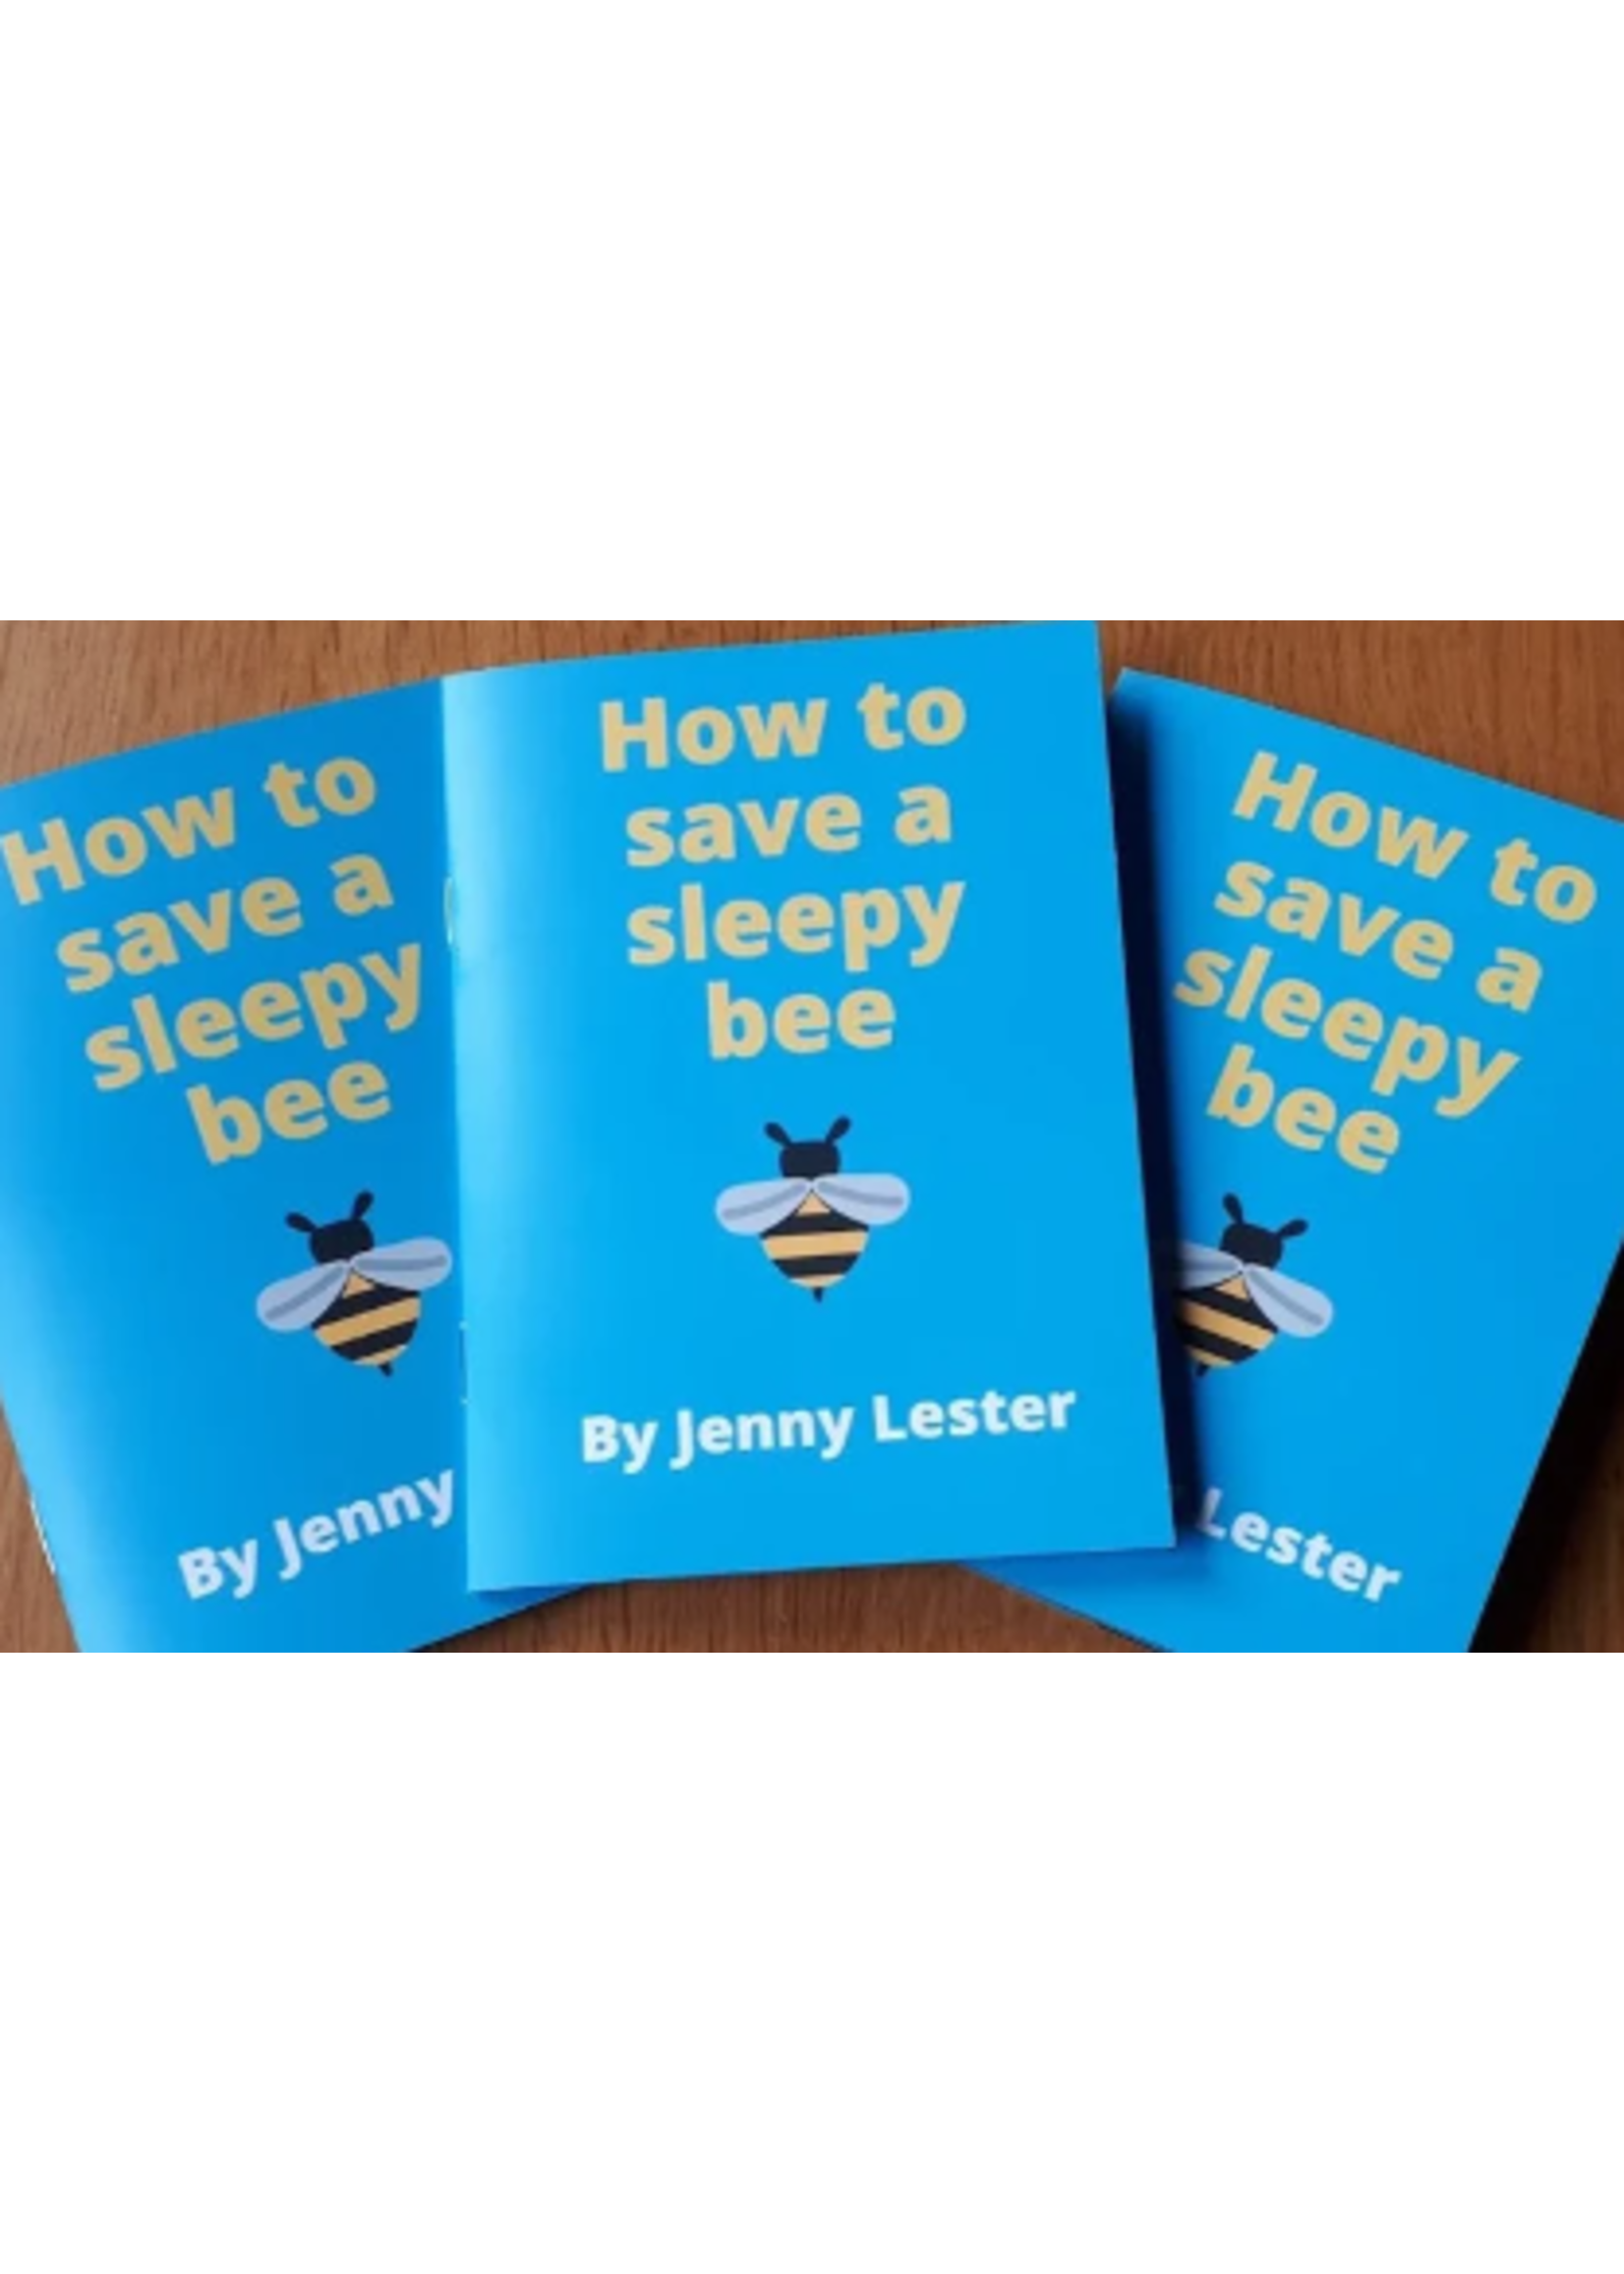 How to Save a Sleepy Bee by Jenny Lester